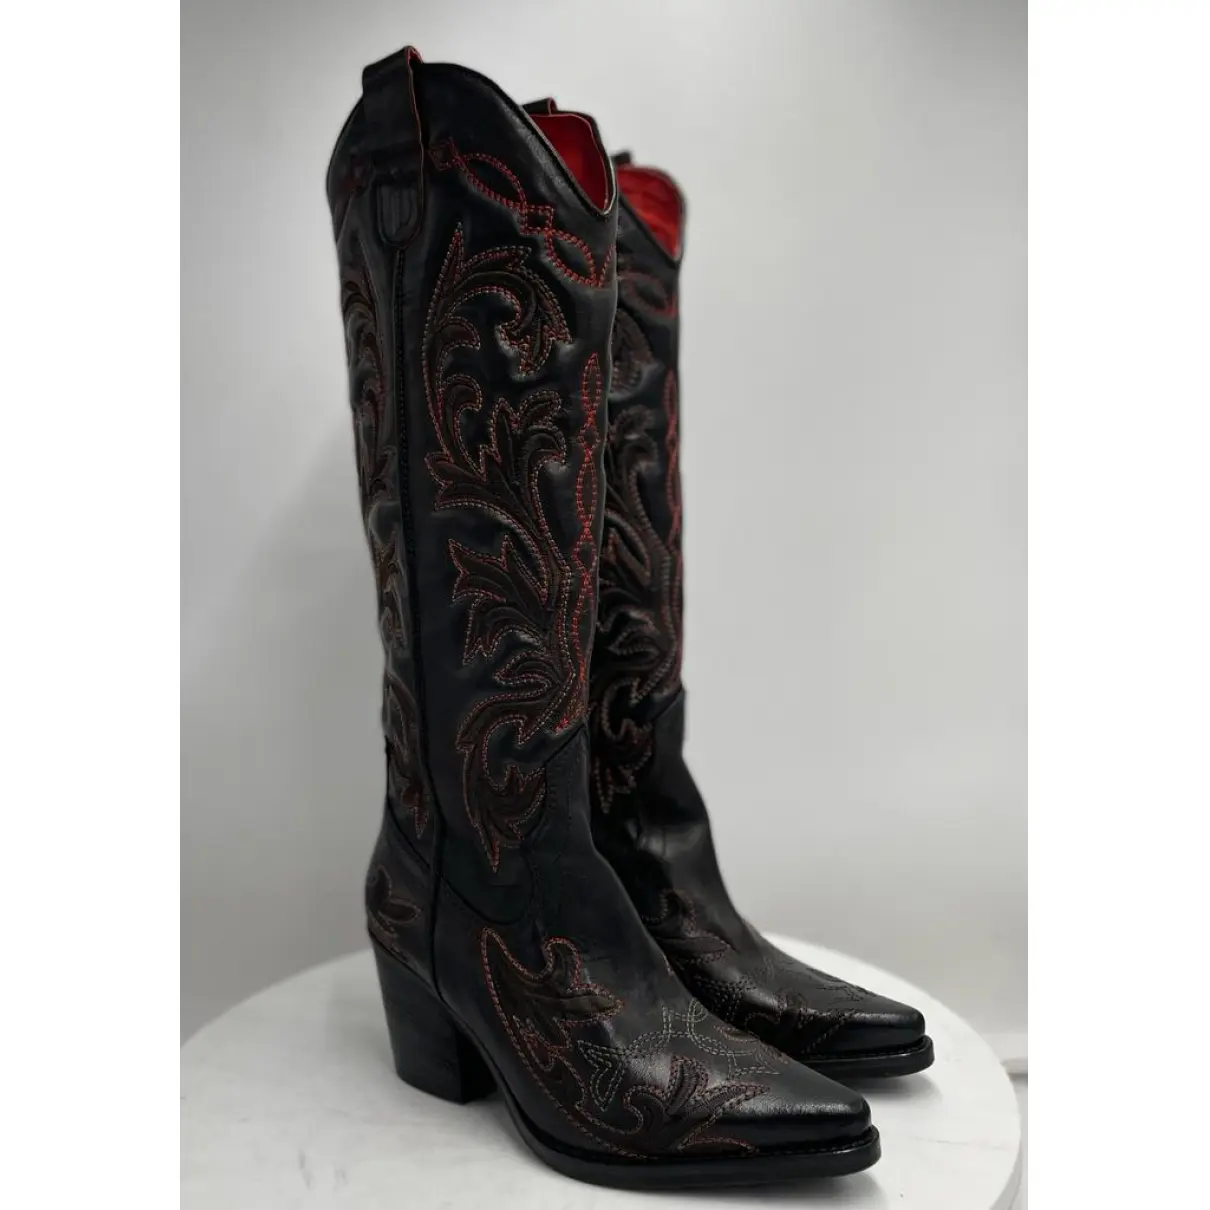 Buy Zoe italy Leather cowboy boots online